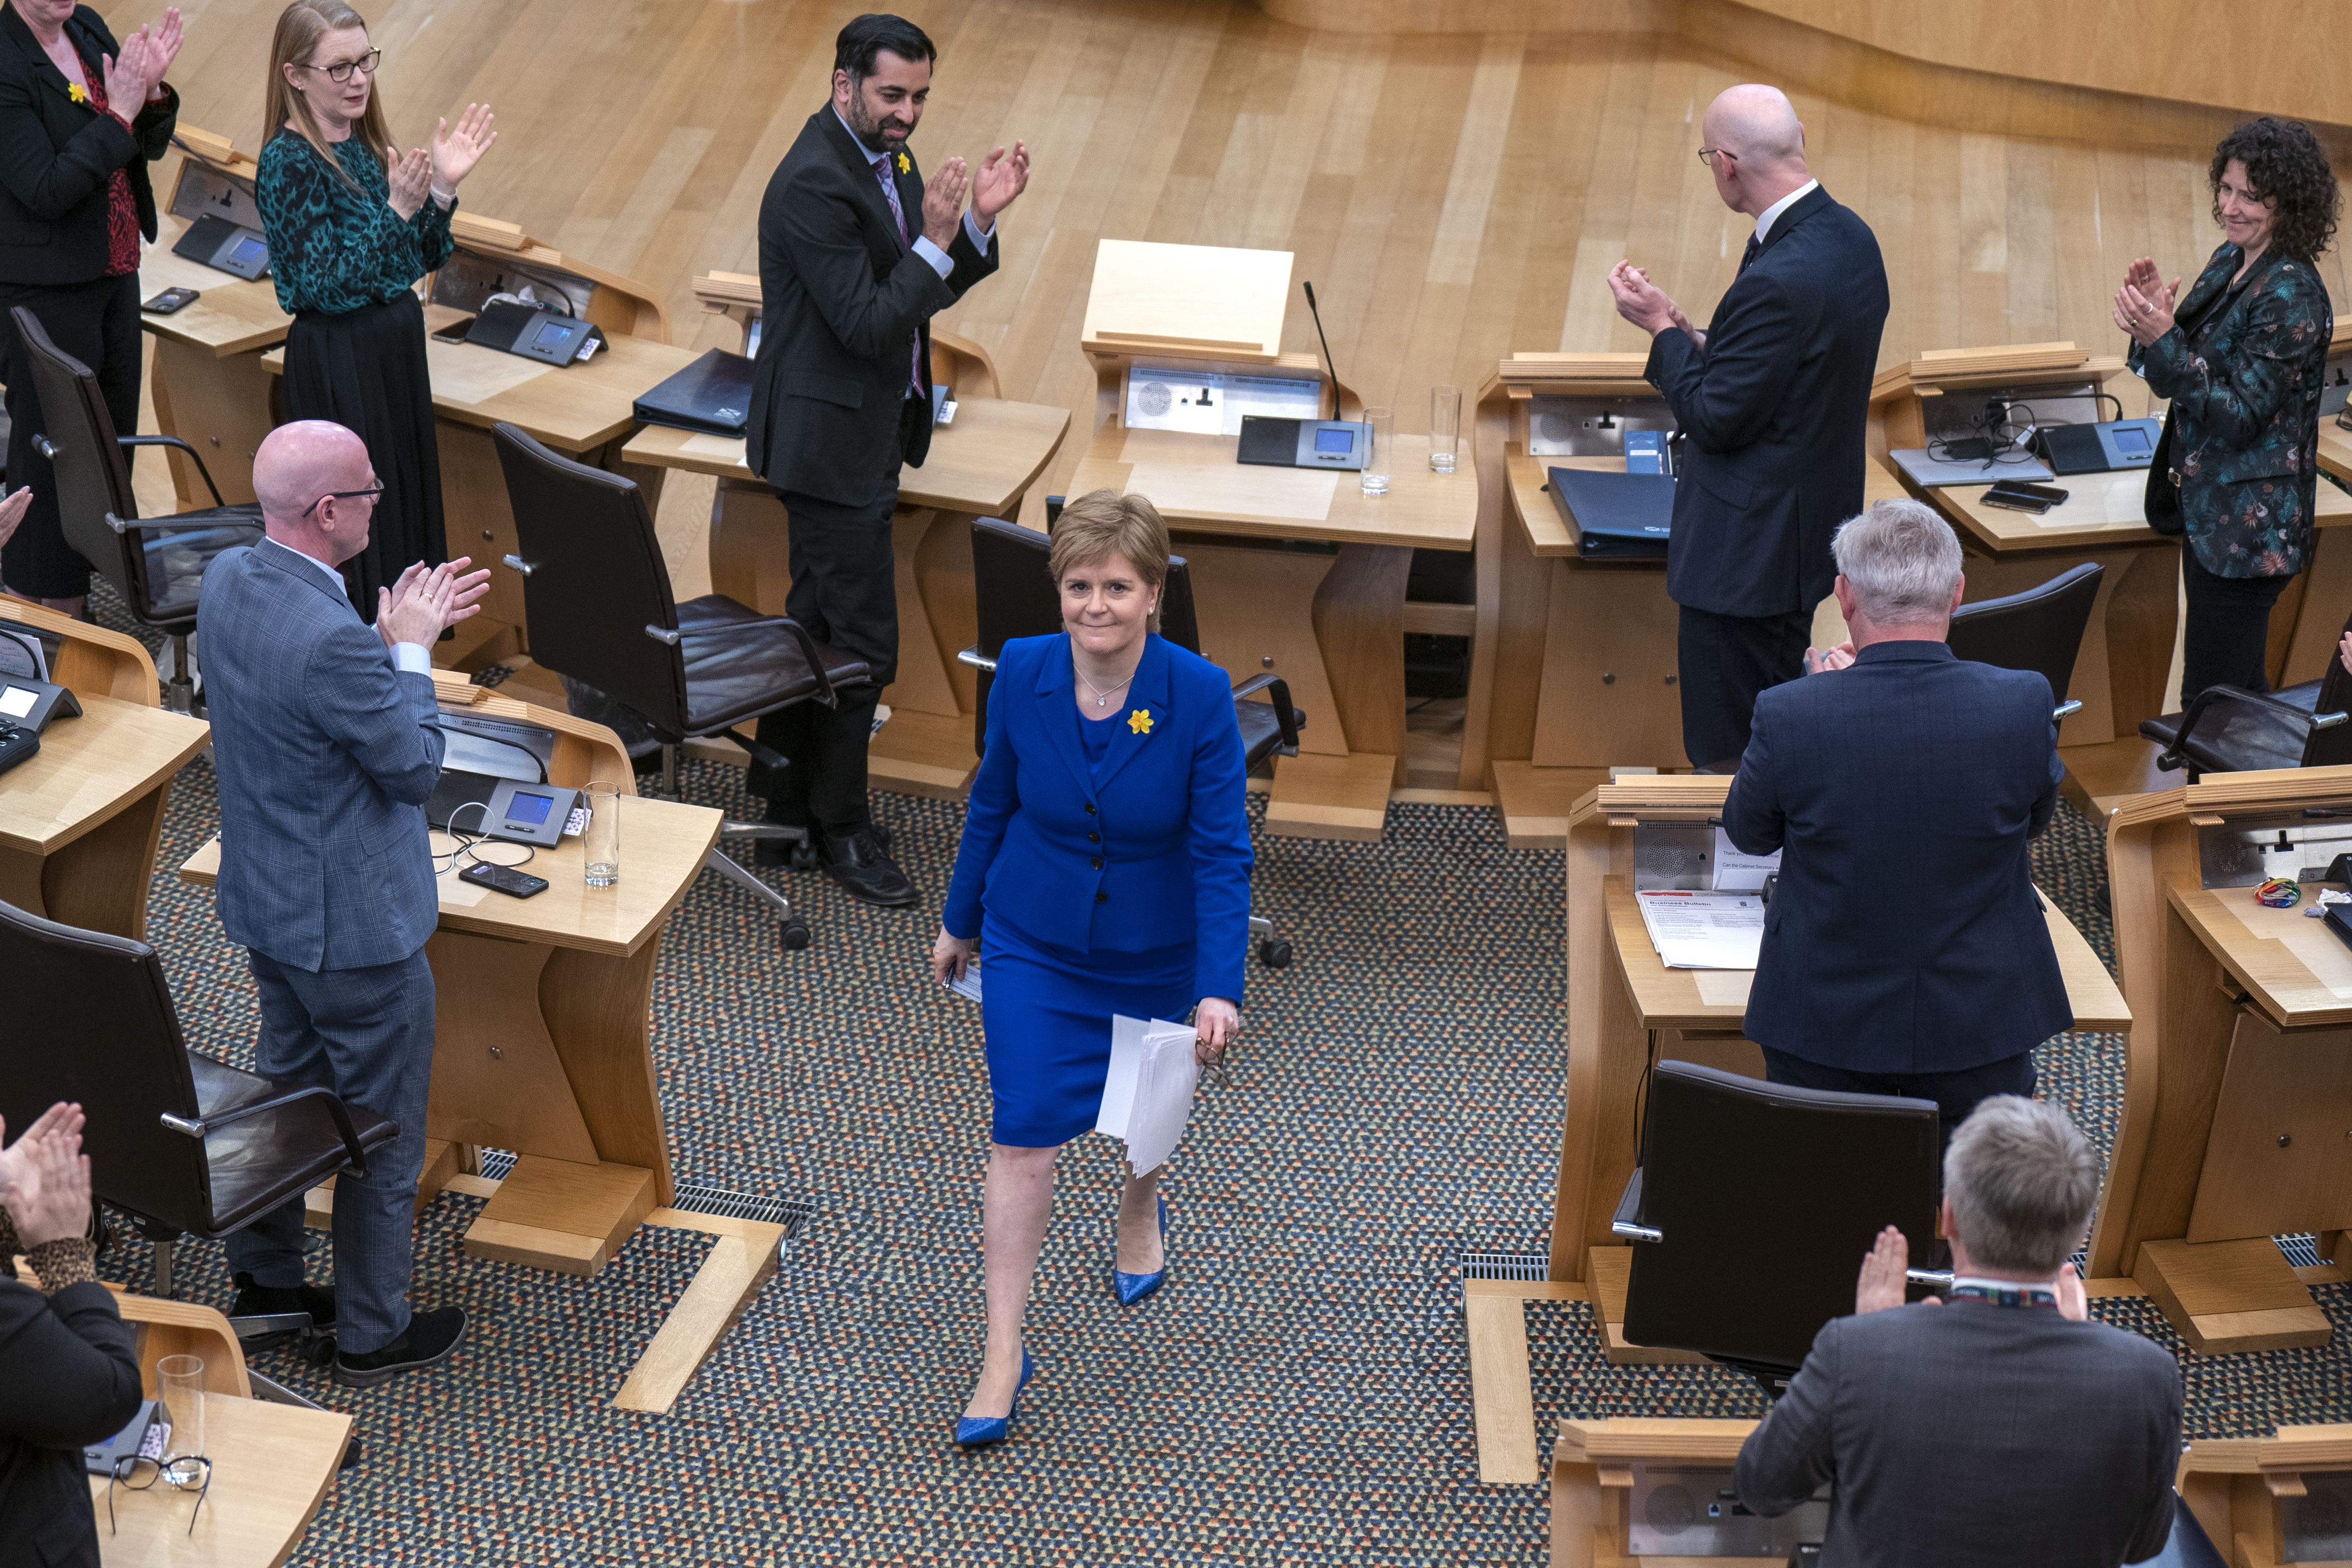 Nicola Sturgeon received ovation after her final FMQs at Holyrood